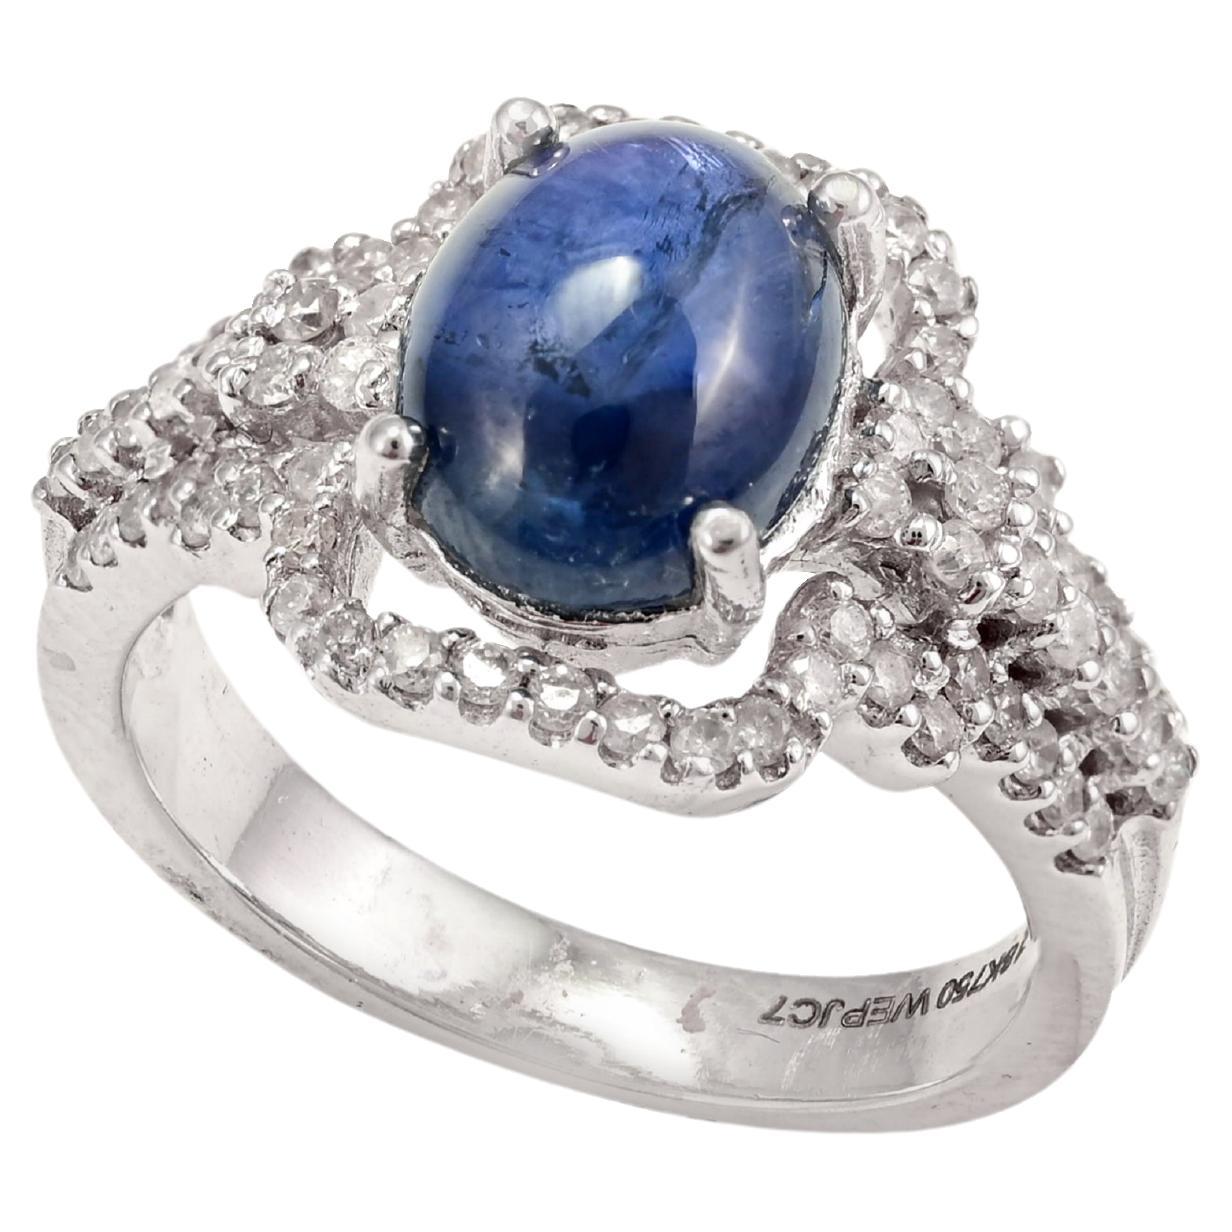 For Sale:  3.01 Ct Blue Sapphire and Diamond Engagement Ring Made 18k Solid White Gold